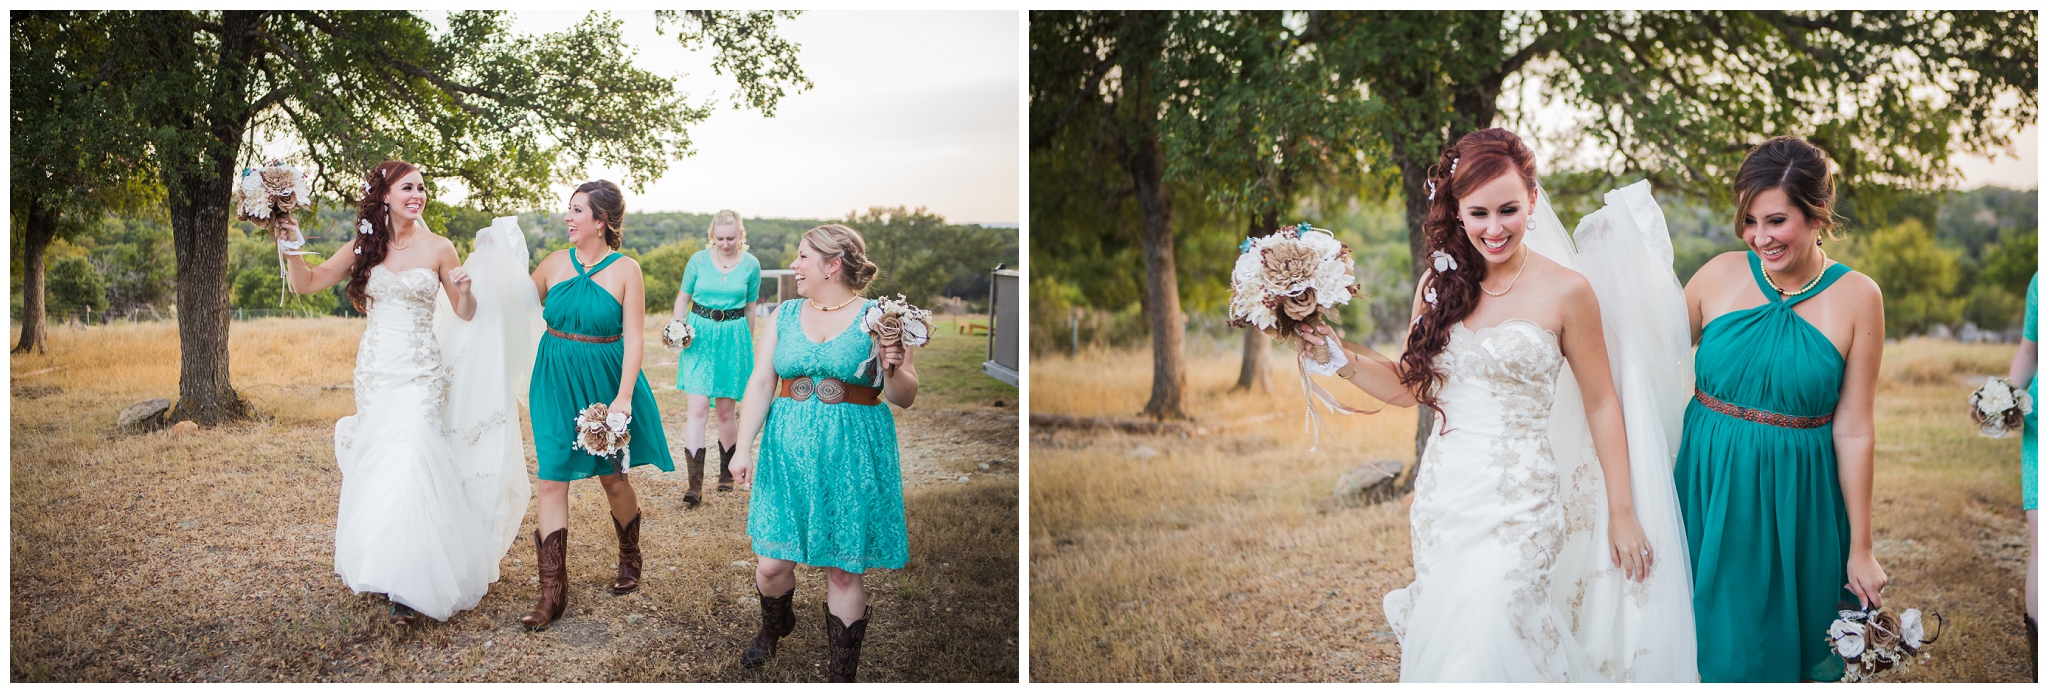 Boerne Wedding Photographer CW Hill Country Ranch Wedding Venue turquoise bronze brown wedding colors Fall Wedding 0072